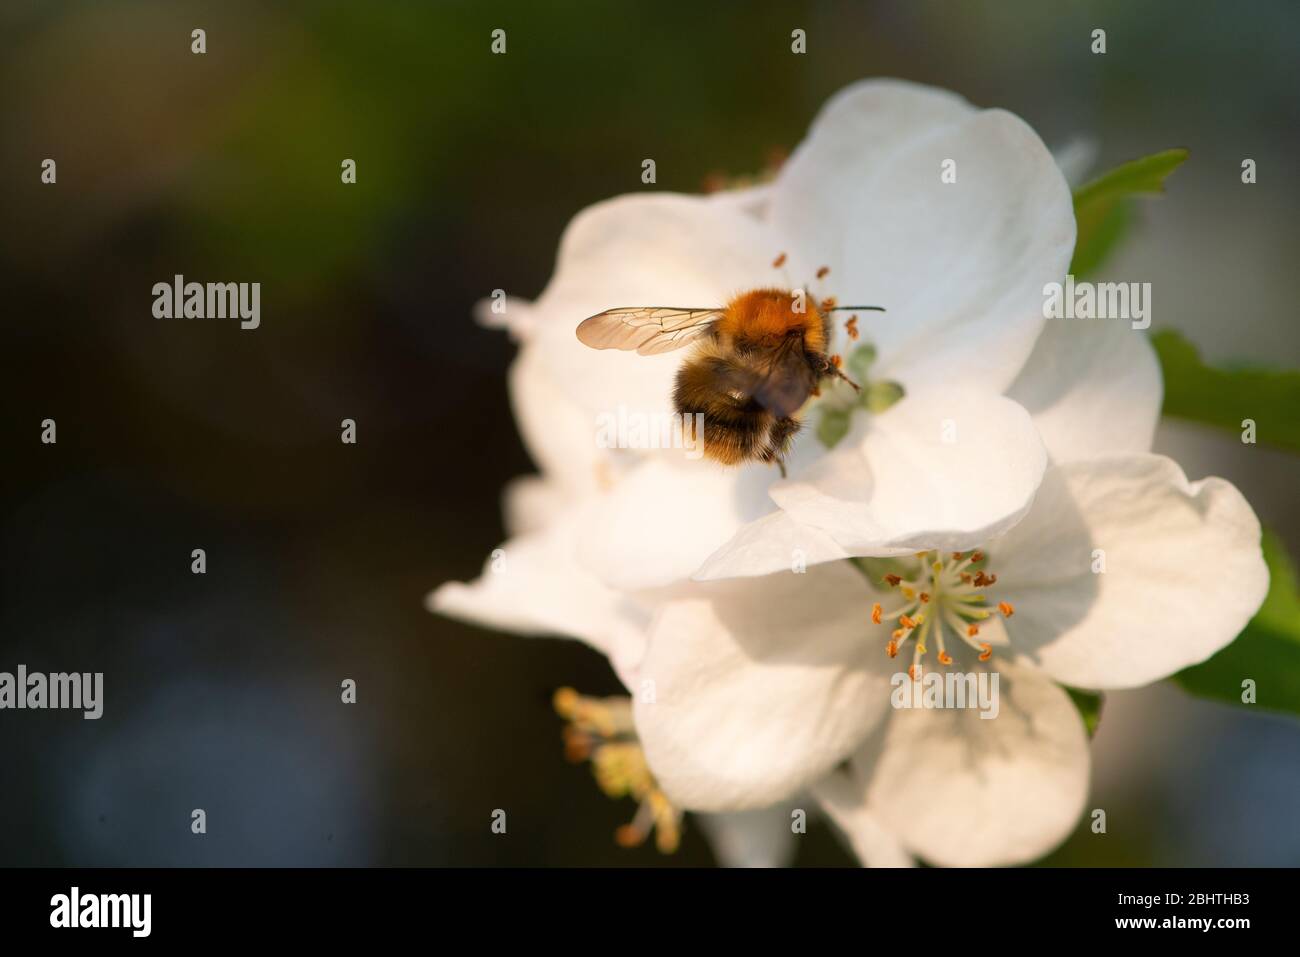 Bumblebee flying in to collect pollen from apple blossom Stock Photo